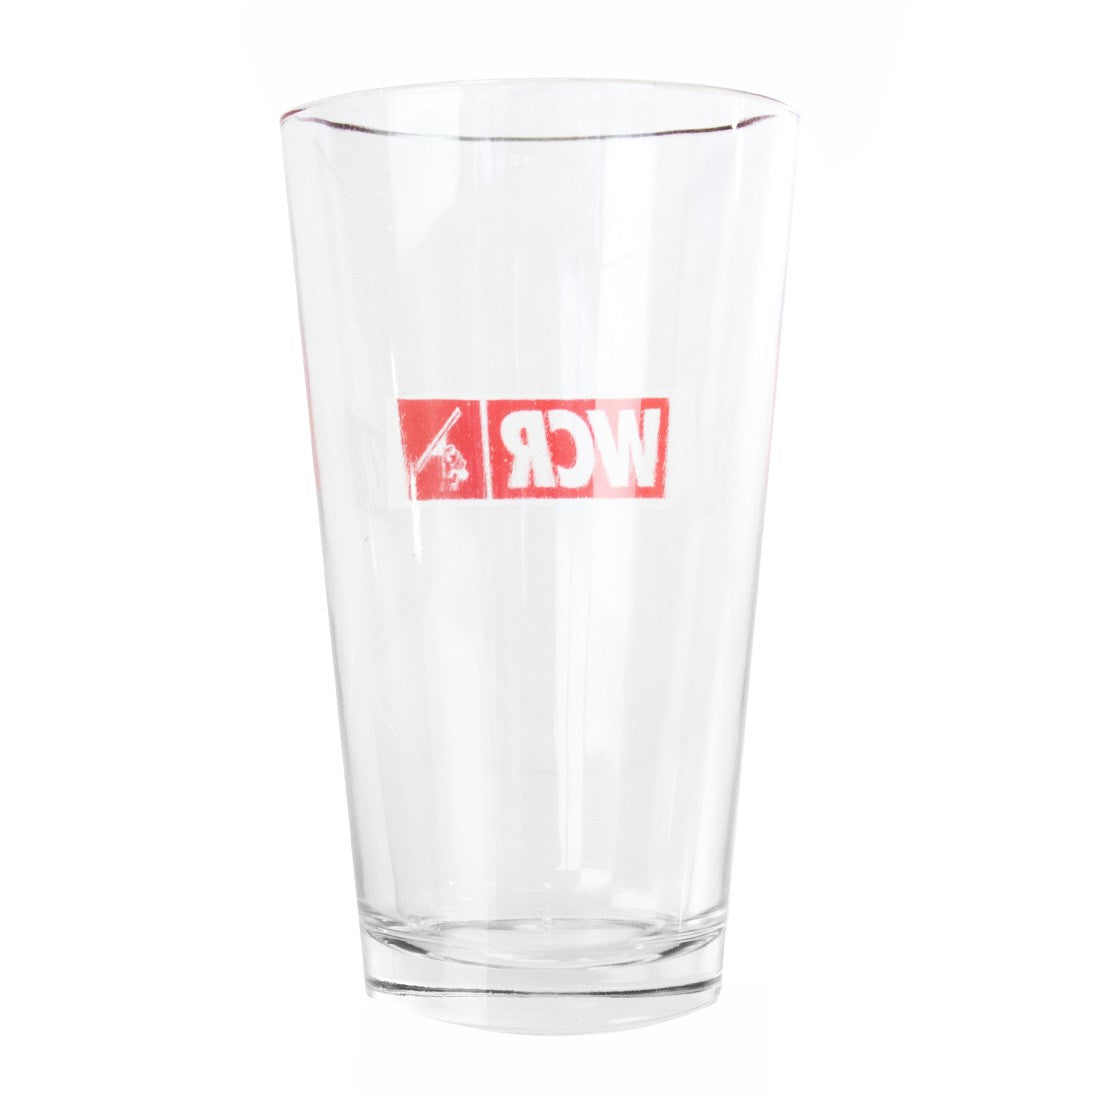 WCR Pint Glass - Back View